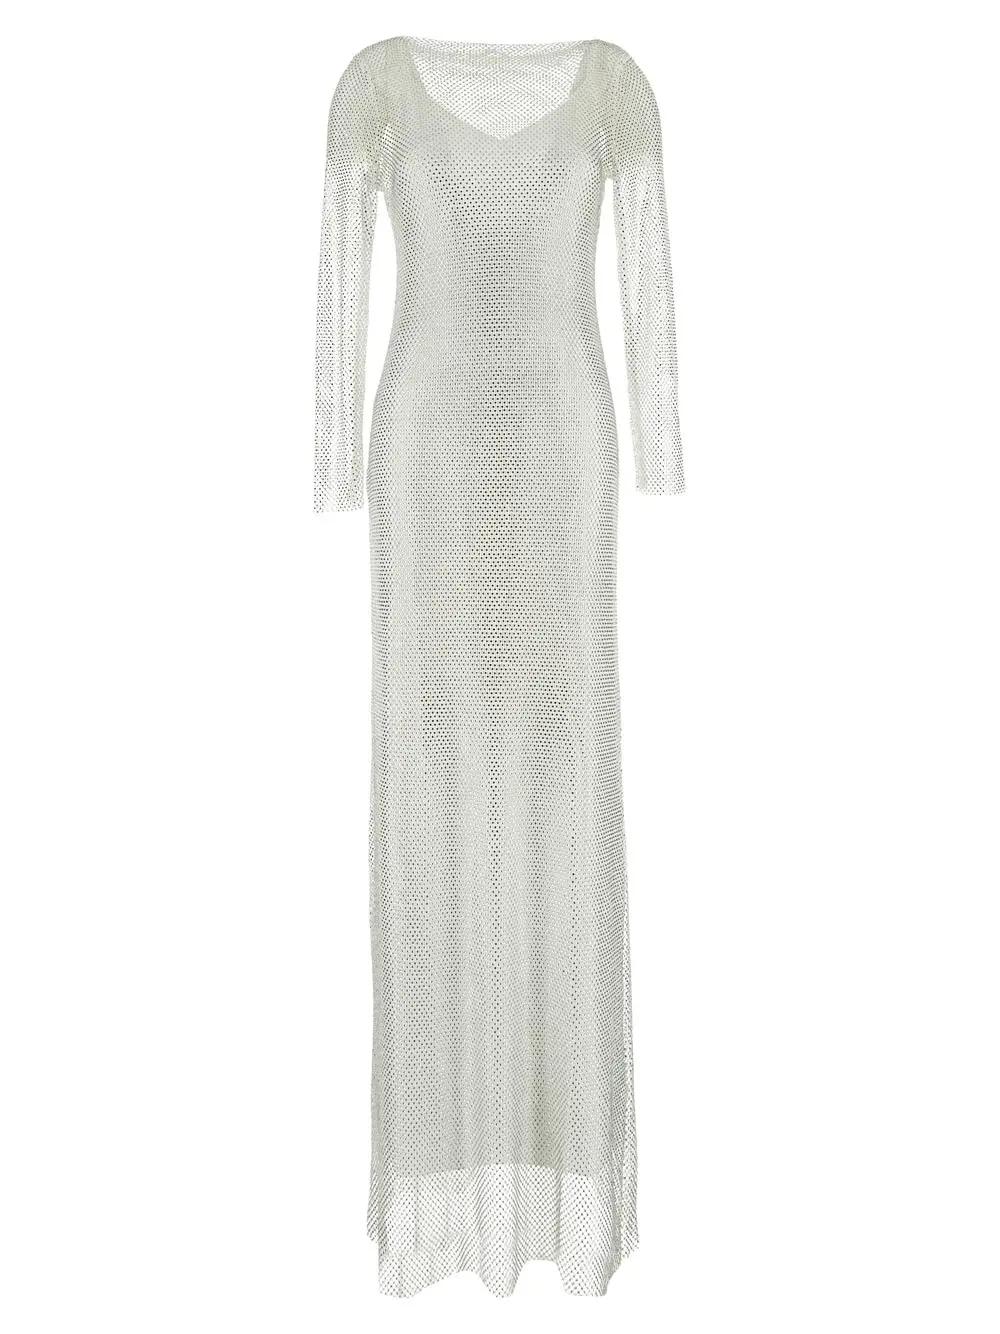 MAX MARA CARACAS EMBROIDERED MESH DRESS WITH CRYSTAL